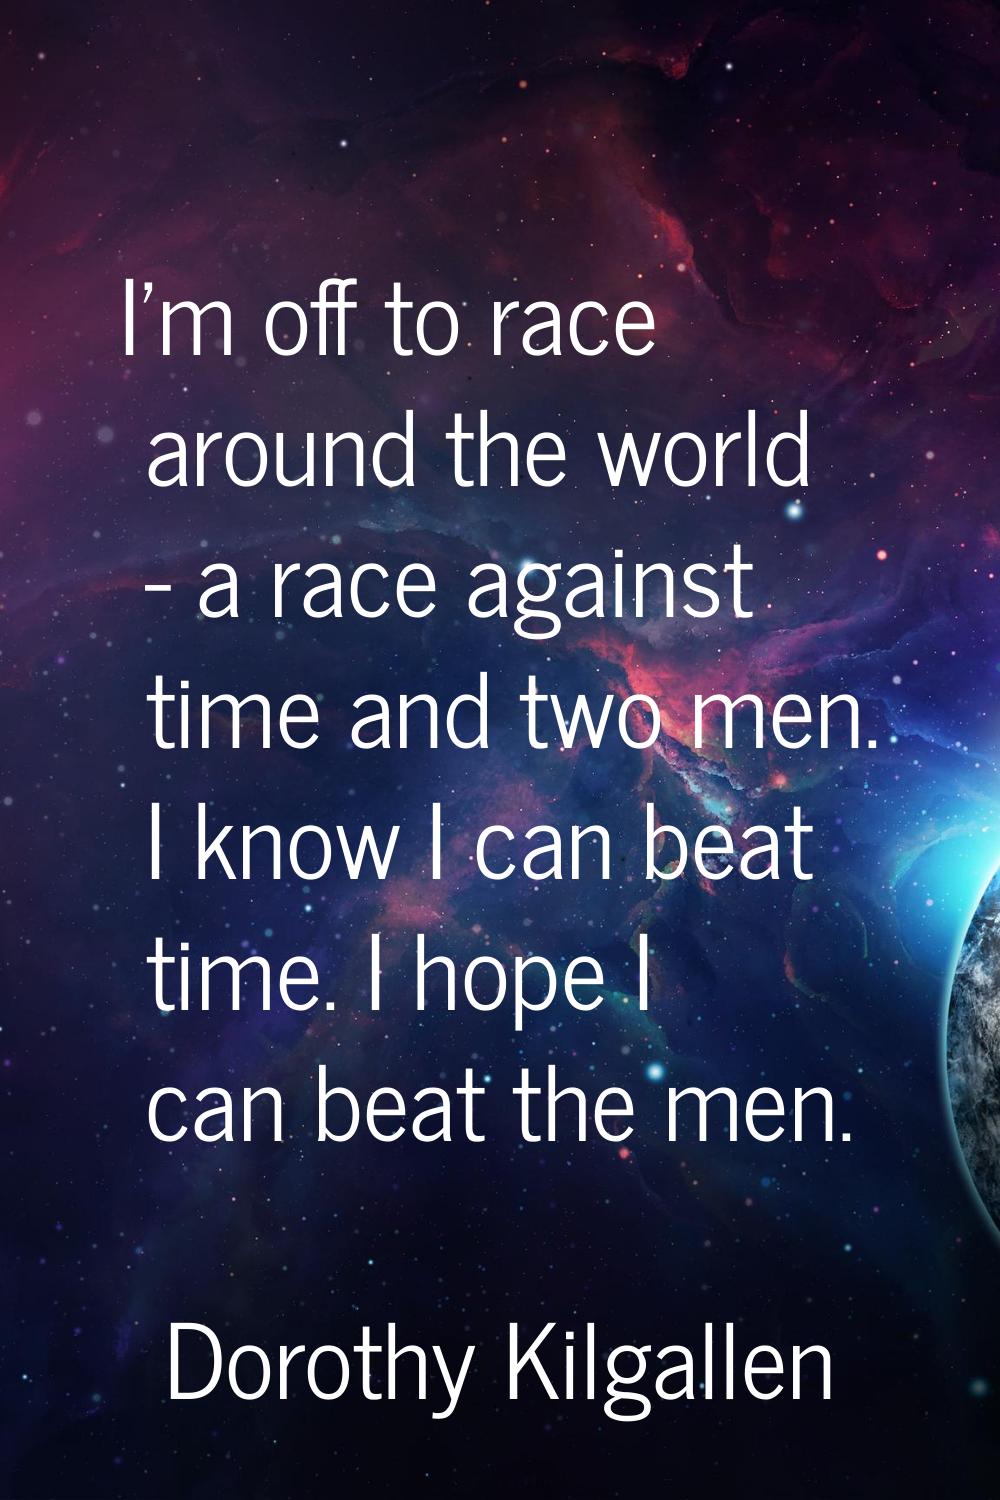 I'm off to race around the world - a race against time and two men. I know I can beat time. I hope 